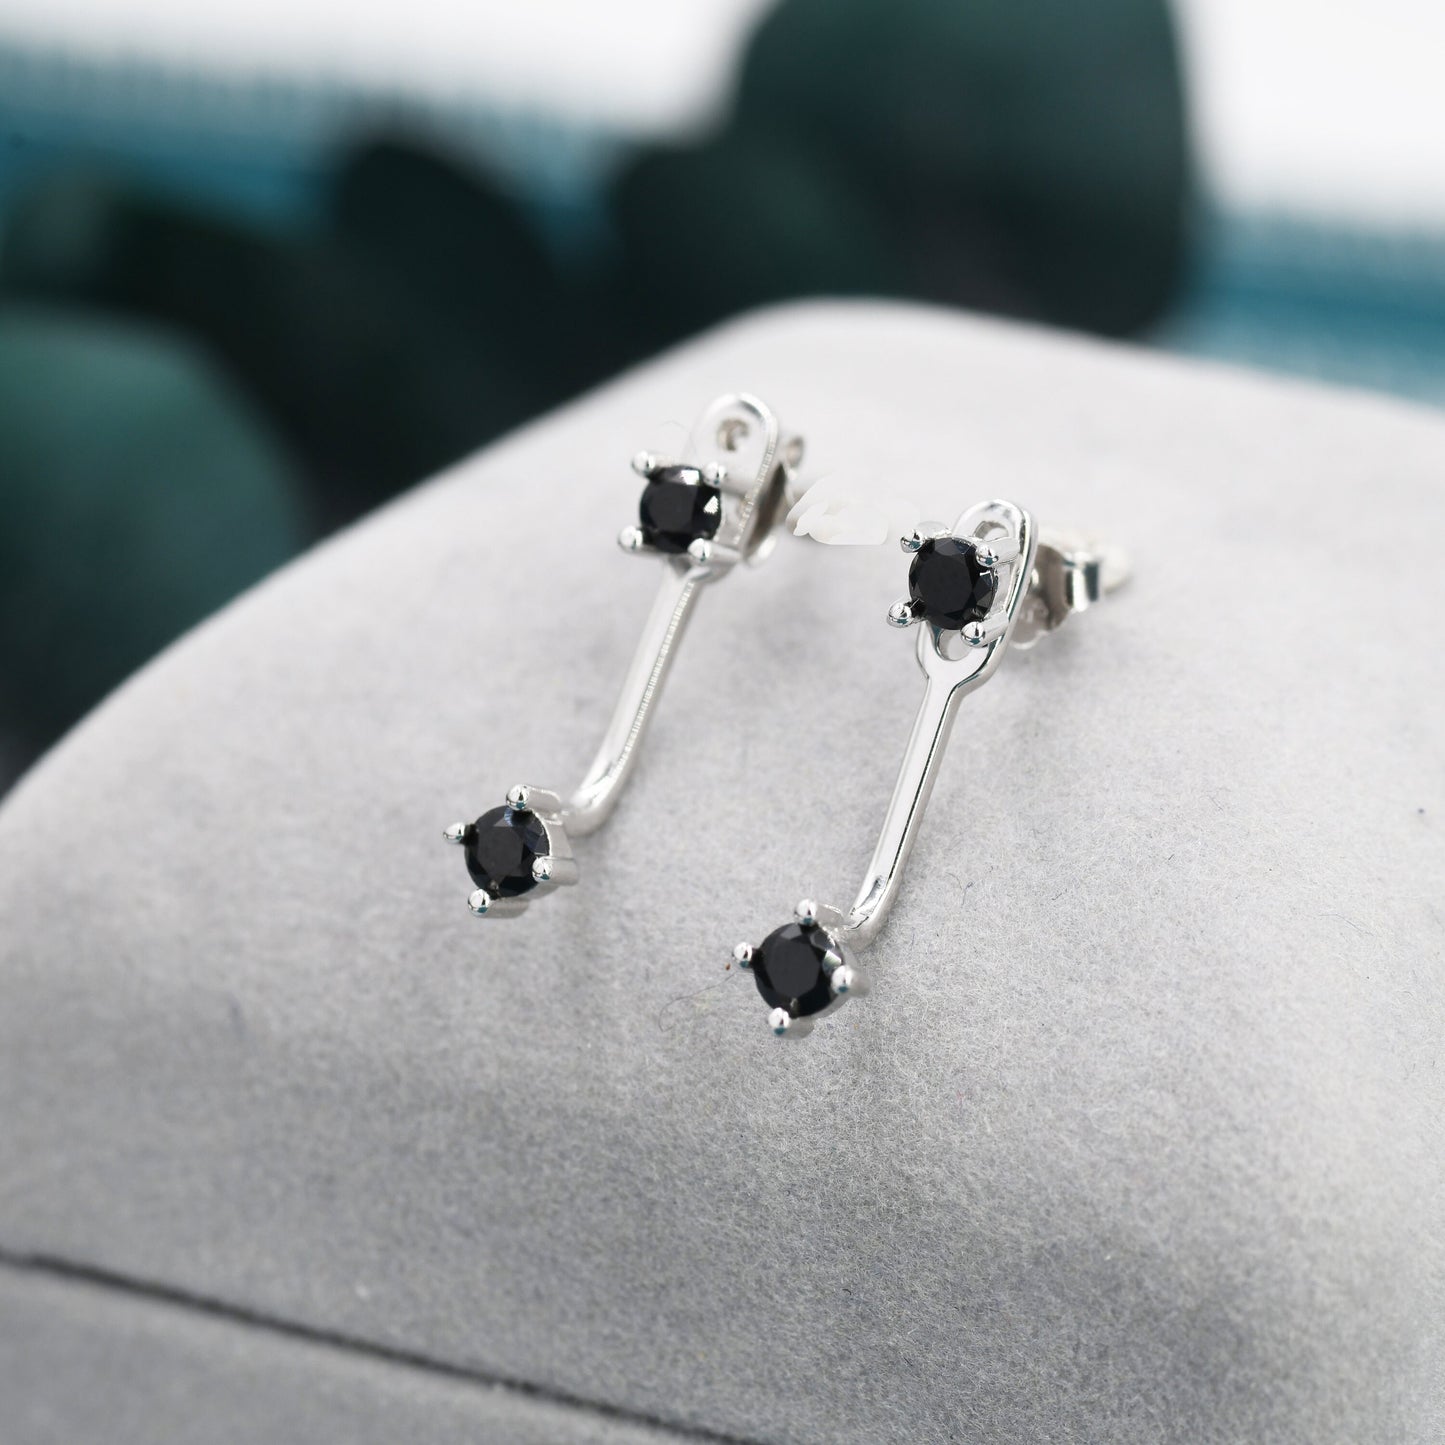 Double Black CZ Ear Jacket in Sterling Silver,  Silver or Gold, Front and Back Earrings, Two Part Earrings